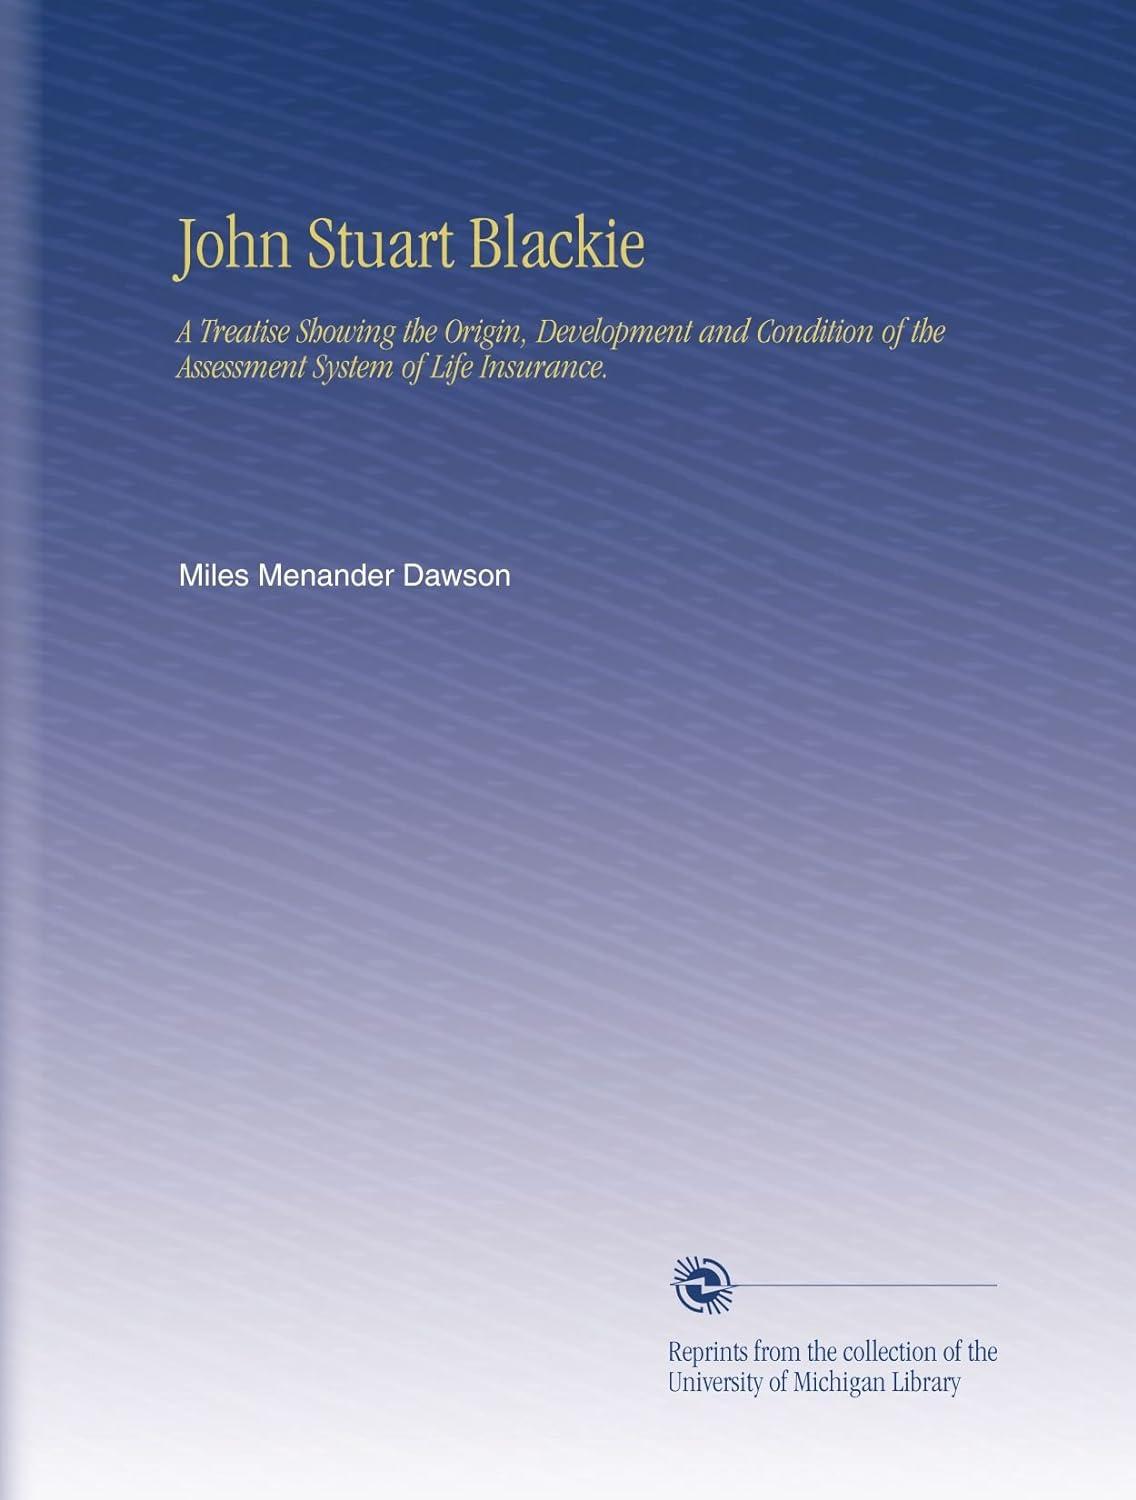 john stuart blackie a treatise showing the origin development and condition of the assessment system of life